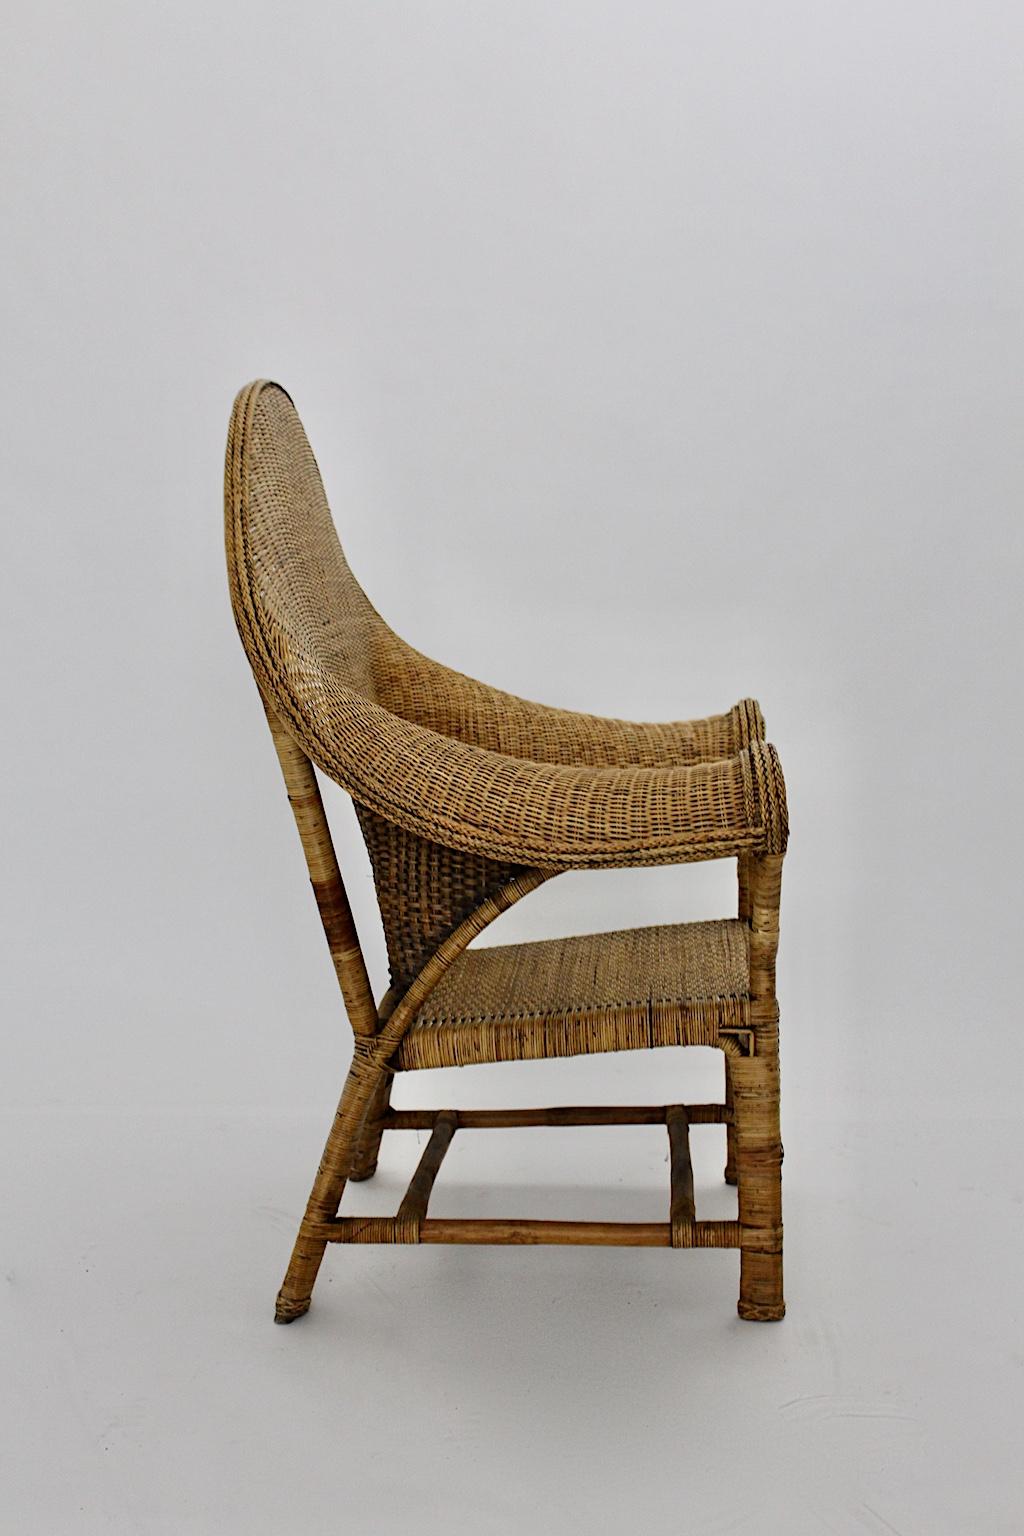 British Organic Arts & Crafts Vintage Wicker Rattan Armchair Dryad and Co circa 1910 UK For Sale